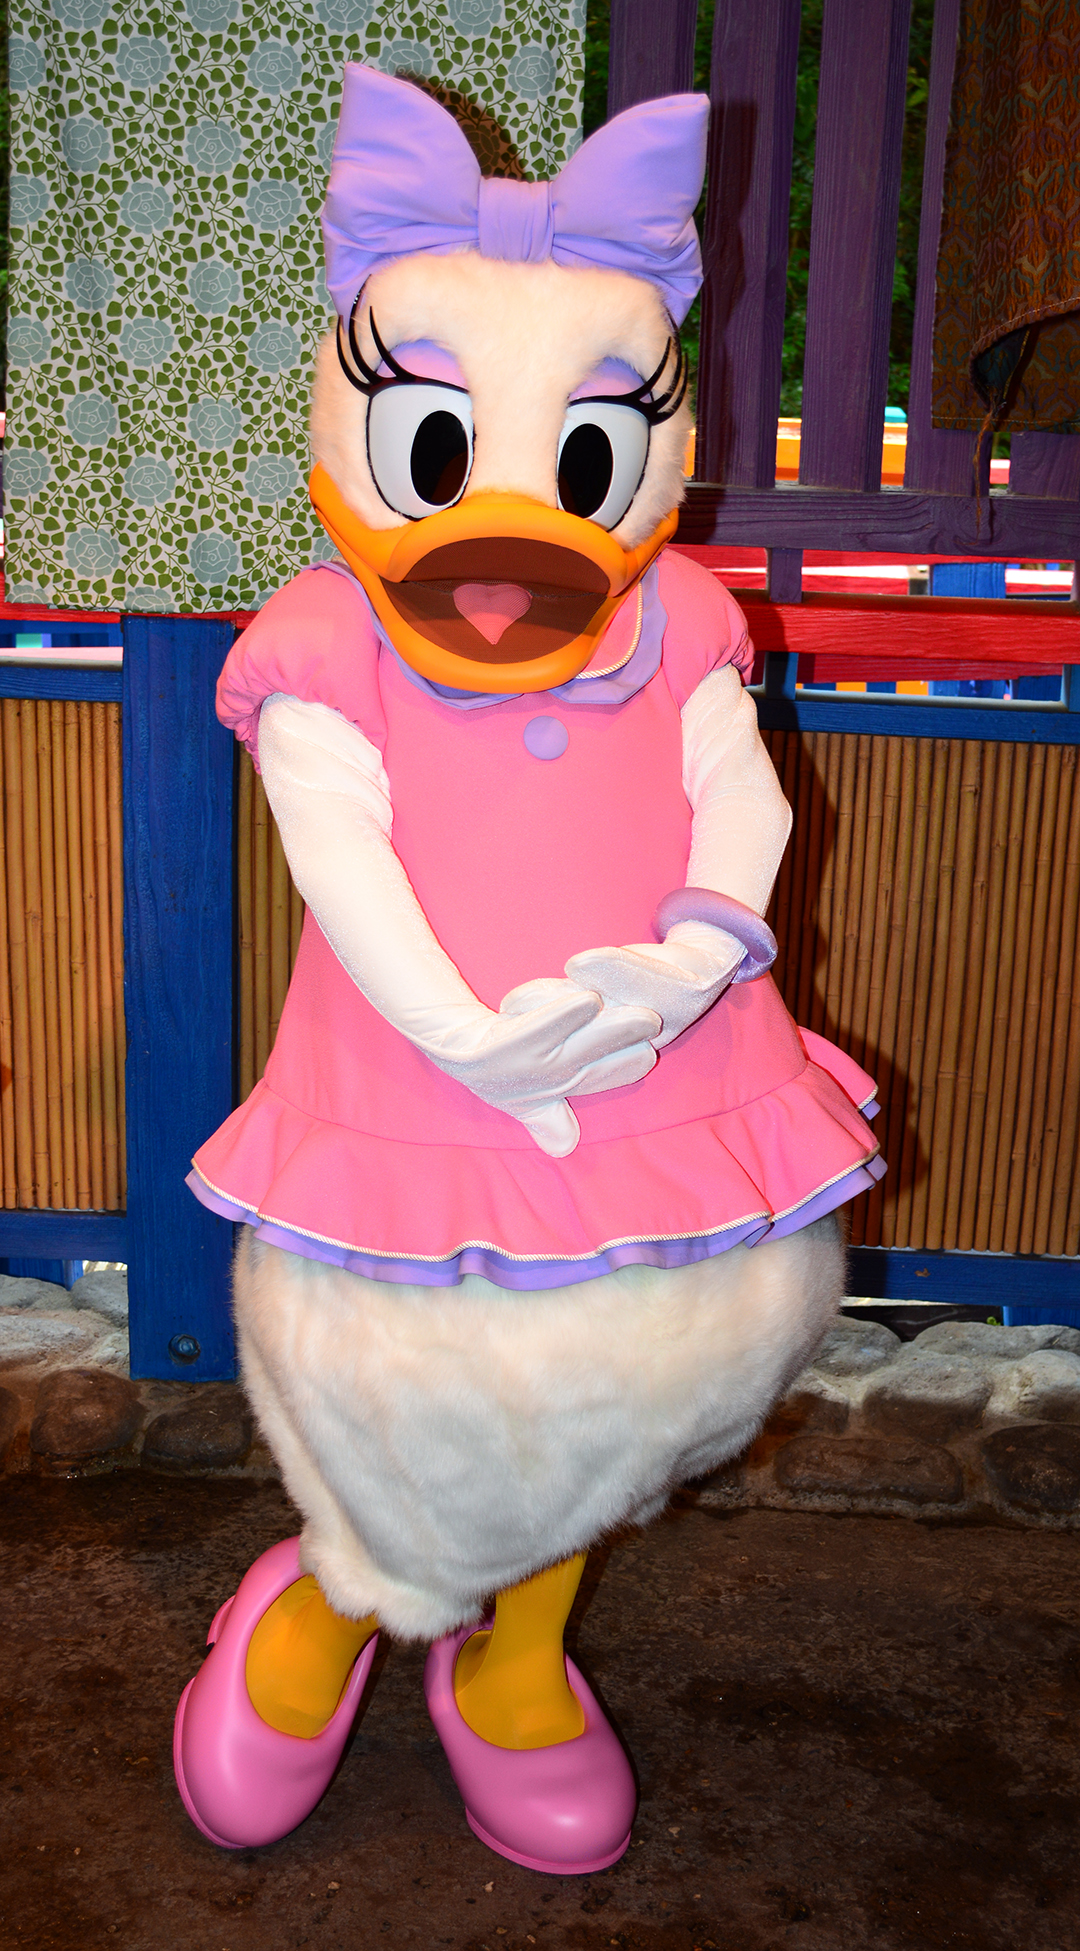 Daisy appearing in her pink dress in Animal Kingdom's Discovery Island